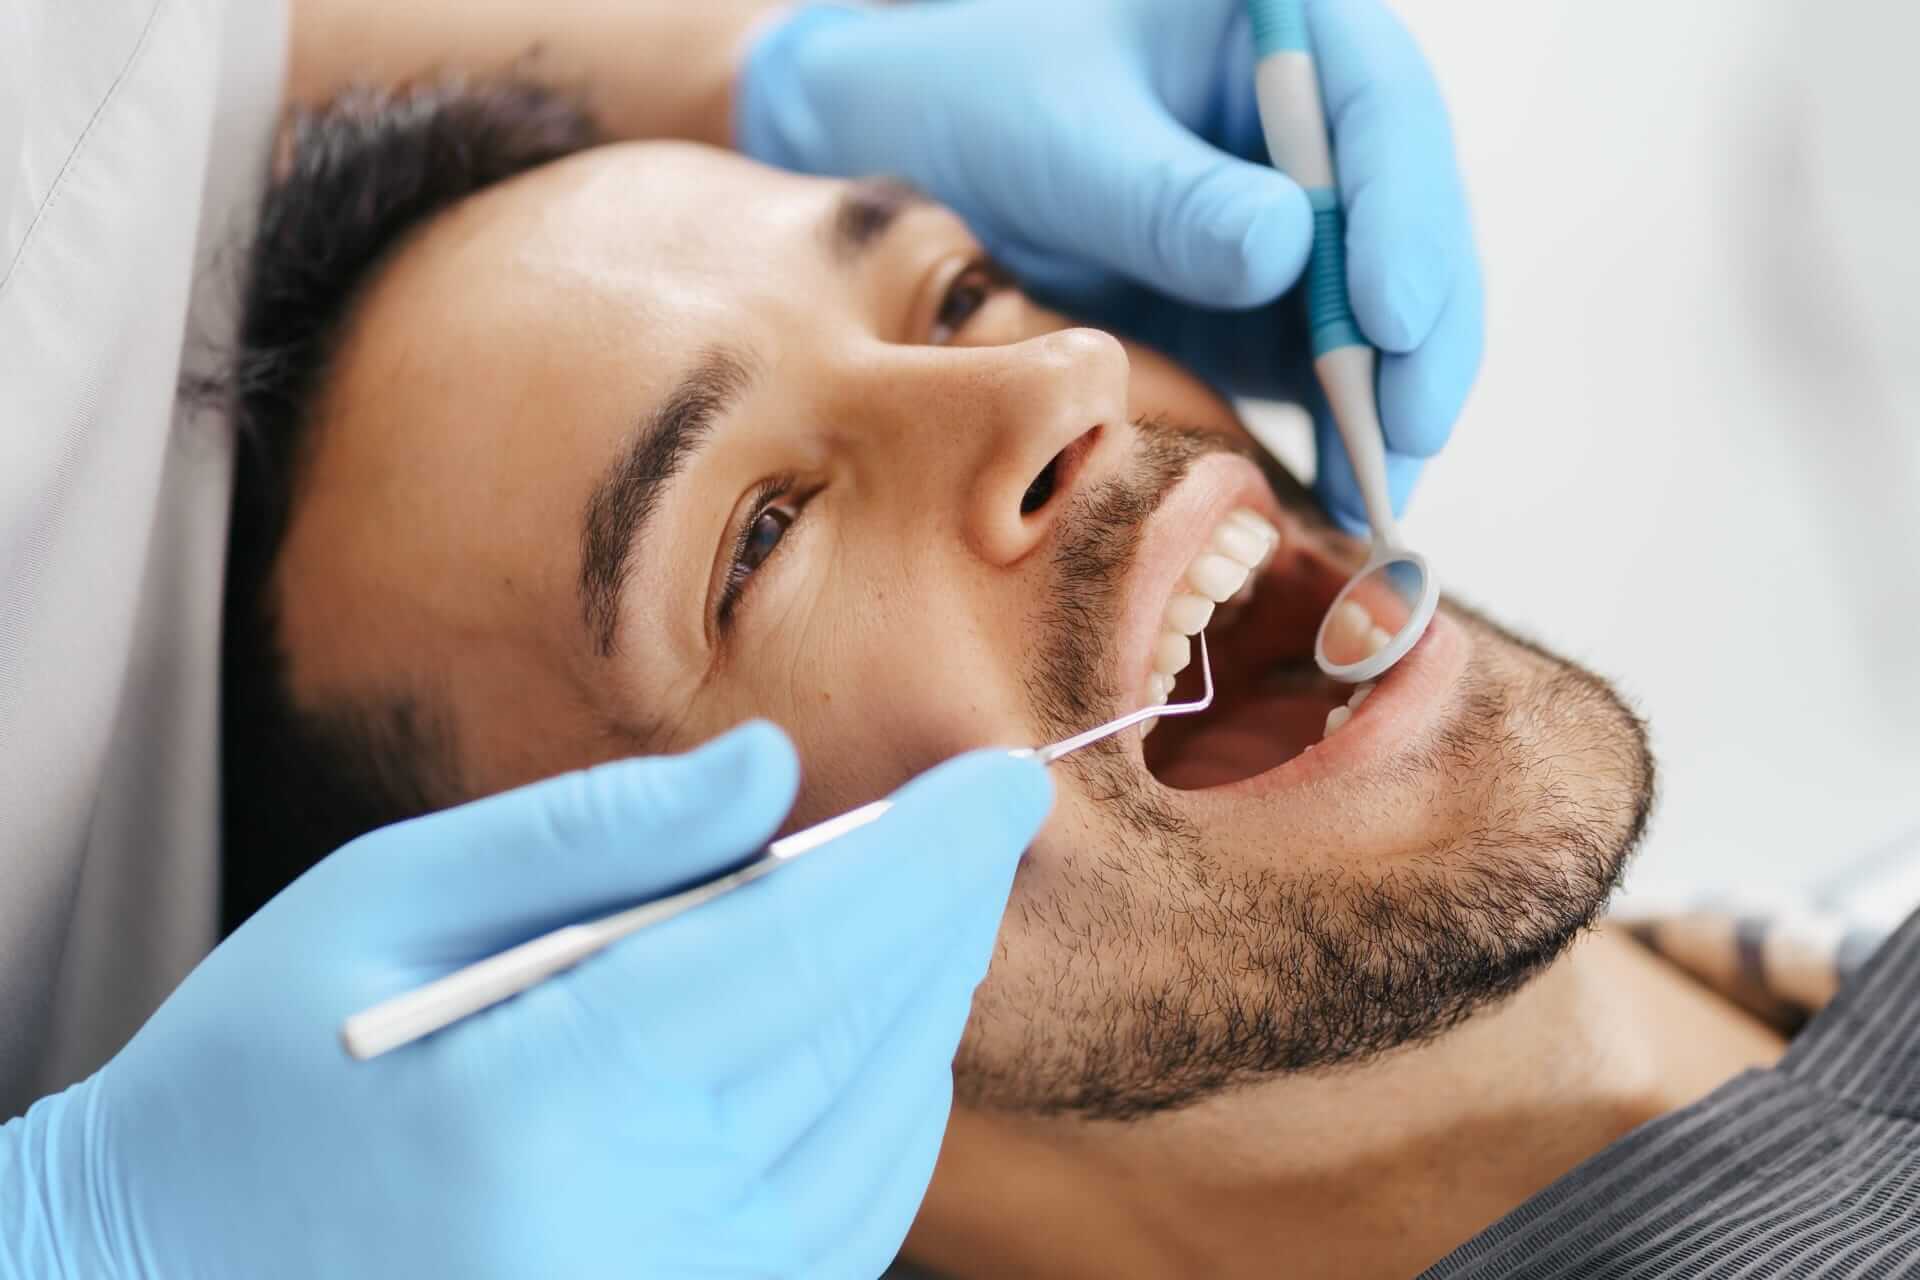 Man getting his teeth cleaned at the dentist